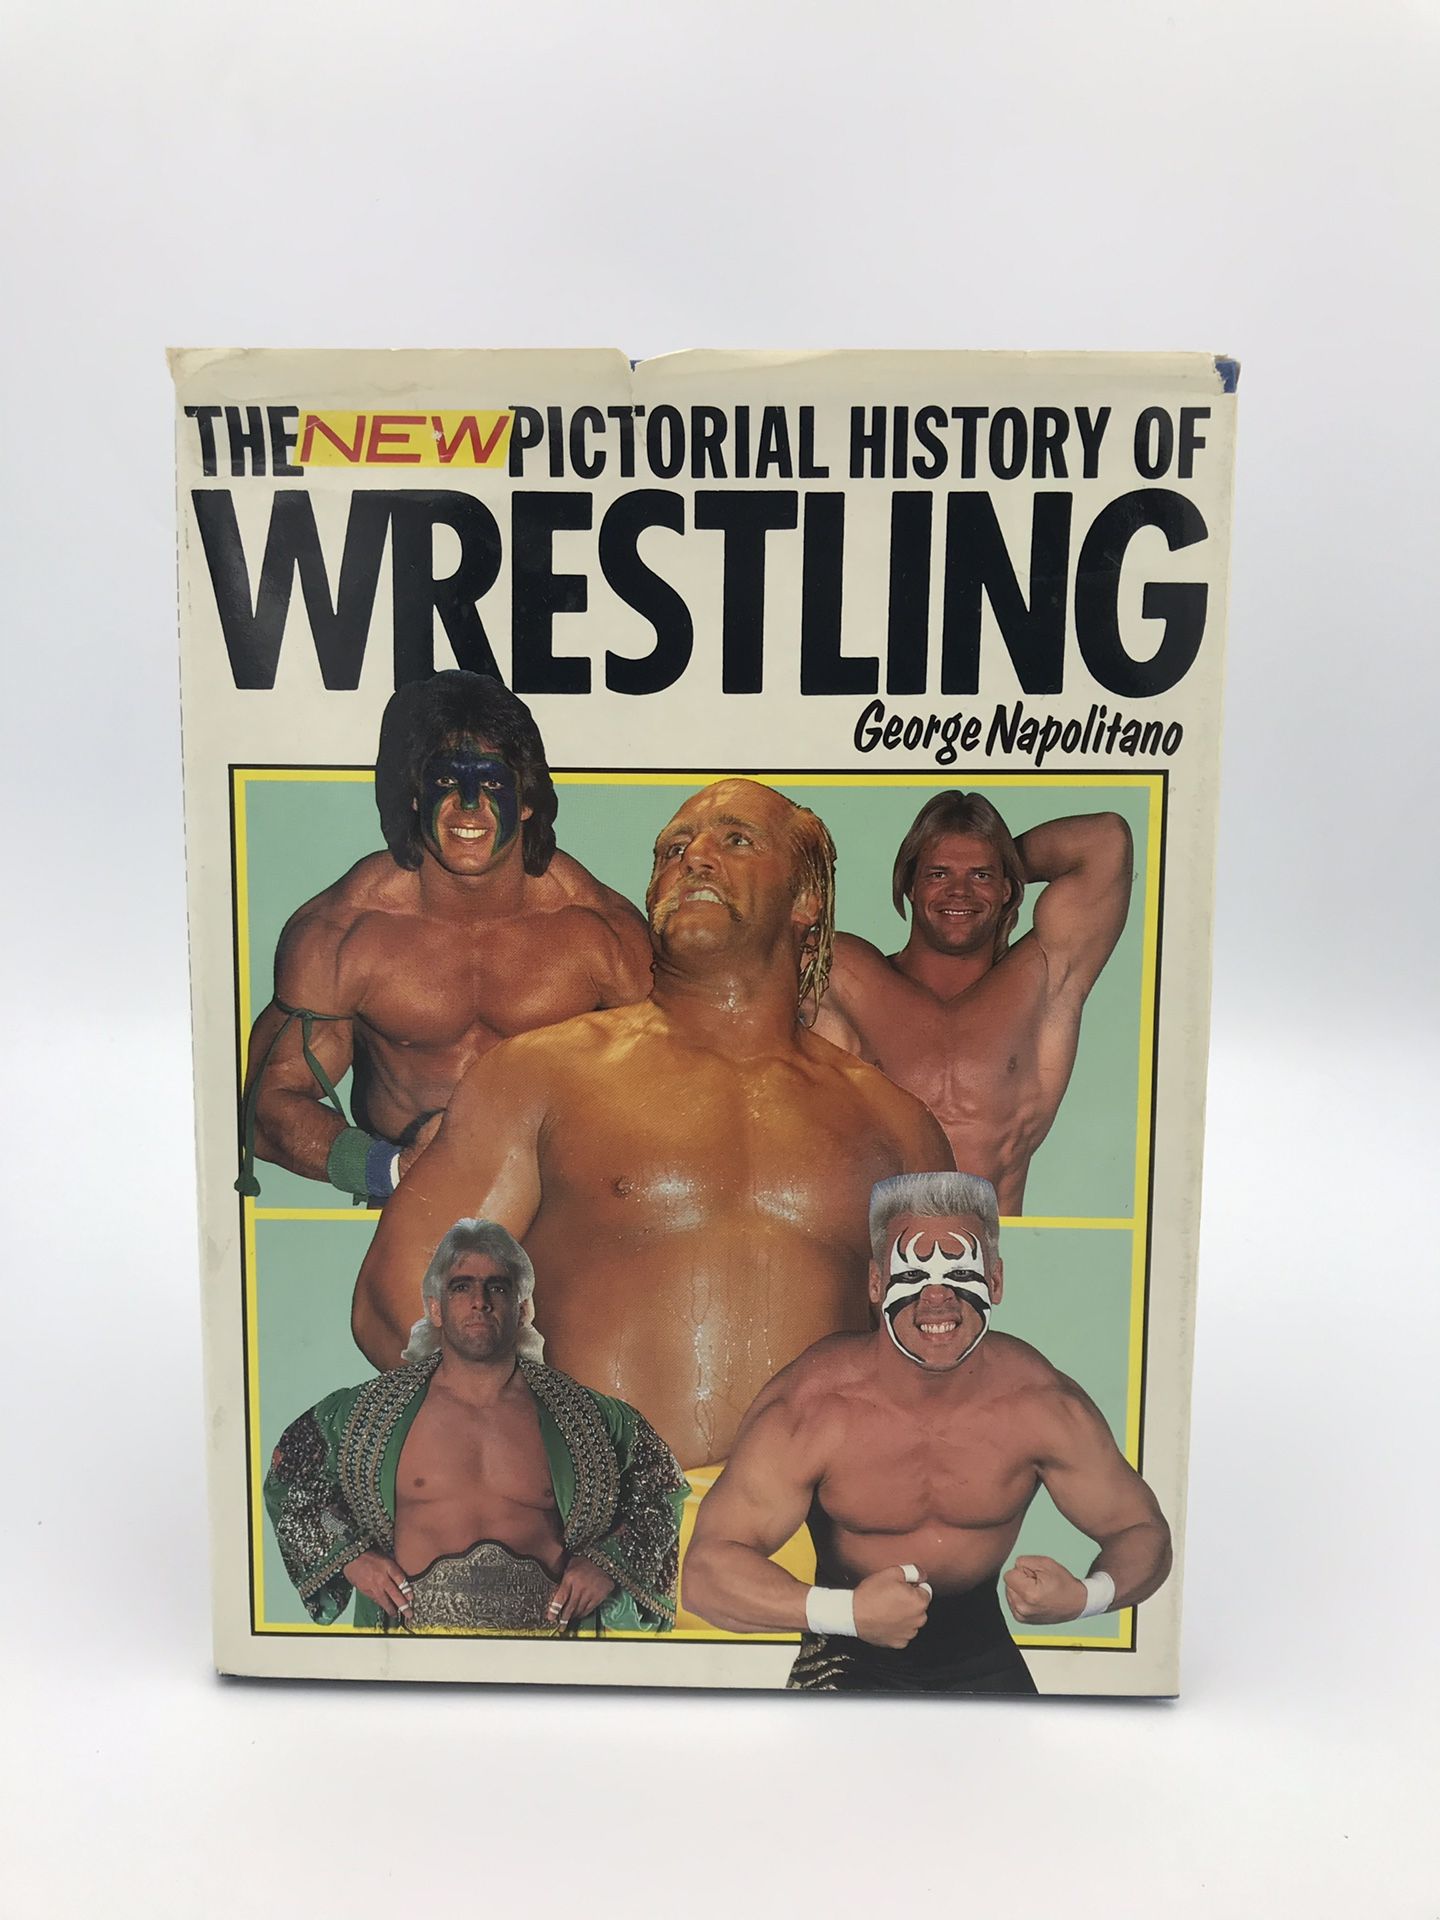 The New Pictorial History of Wrestling BOOK WWF WWE WCW